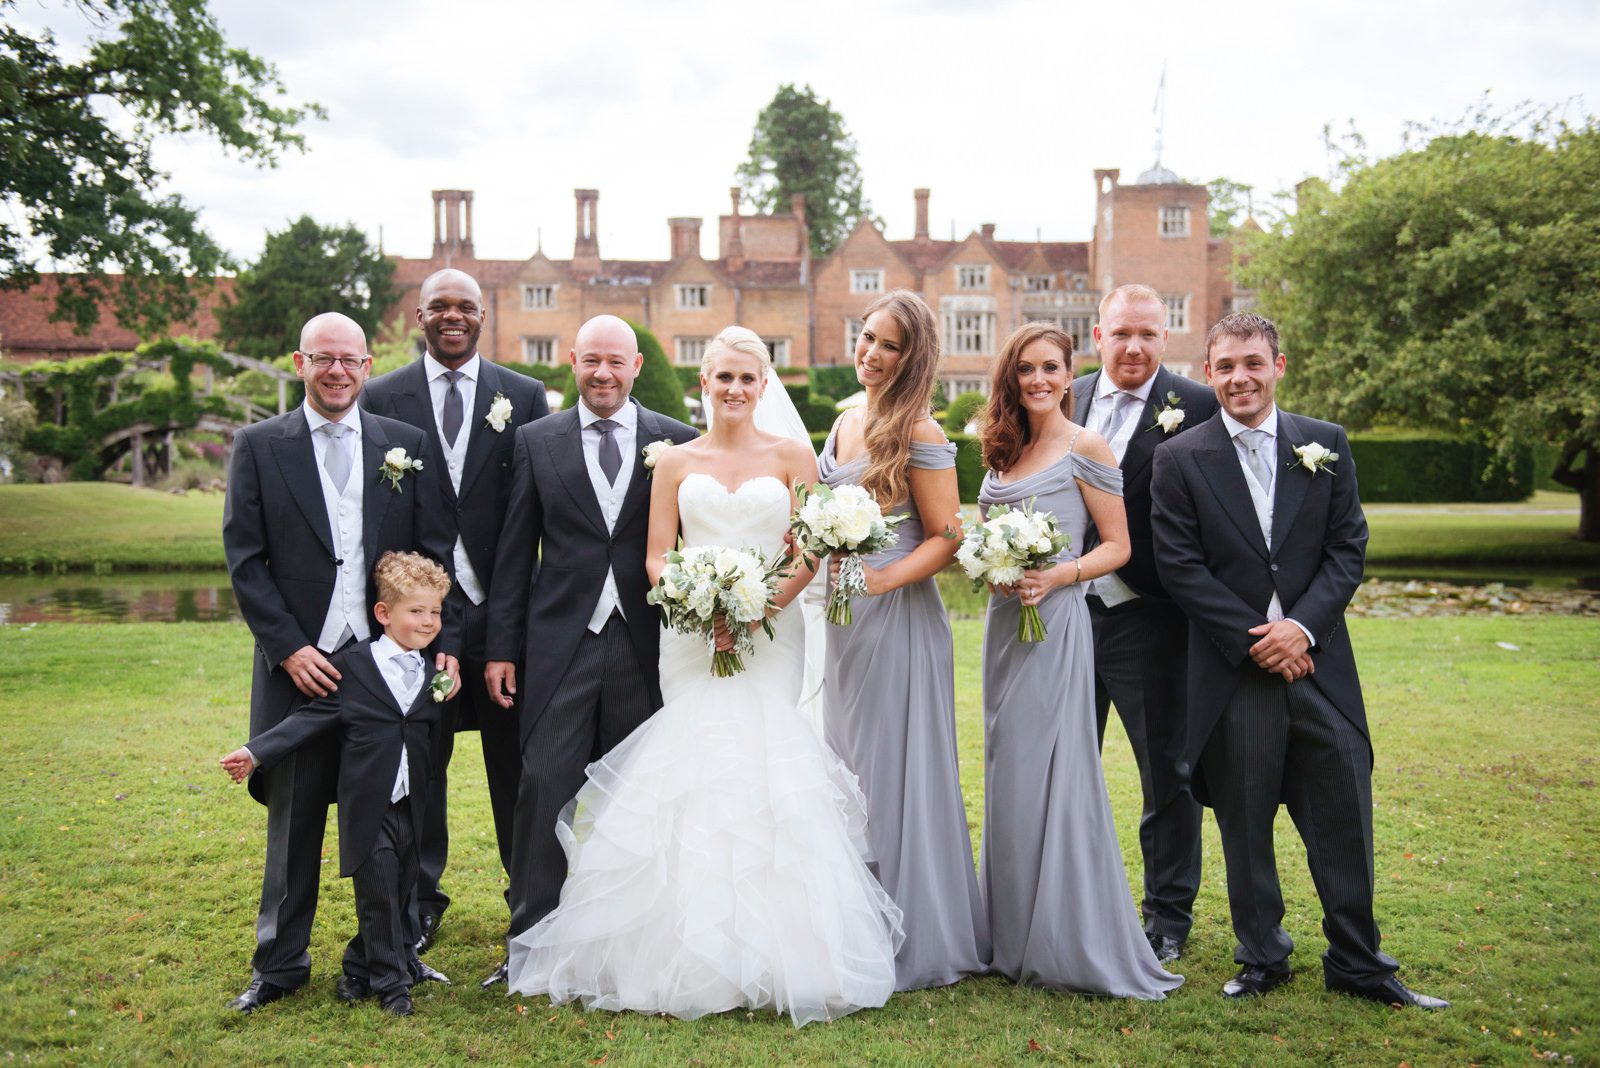 Summer wedding photographs at Great Fosters by Juliet Mckee Photography.